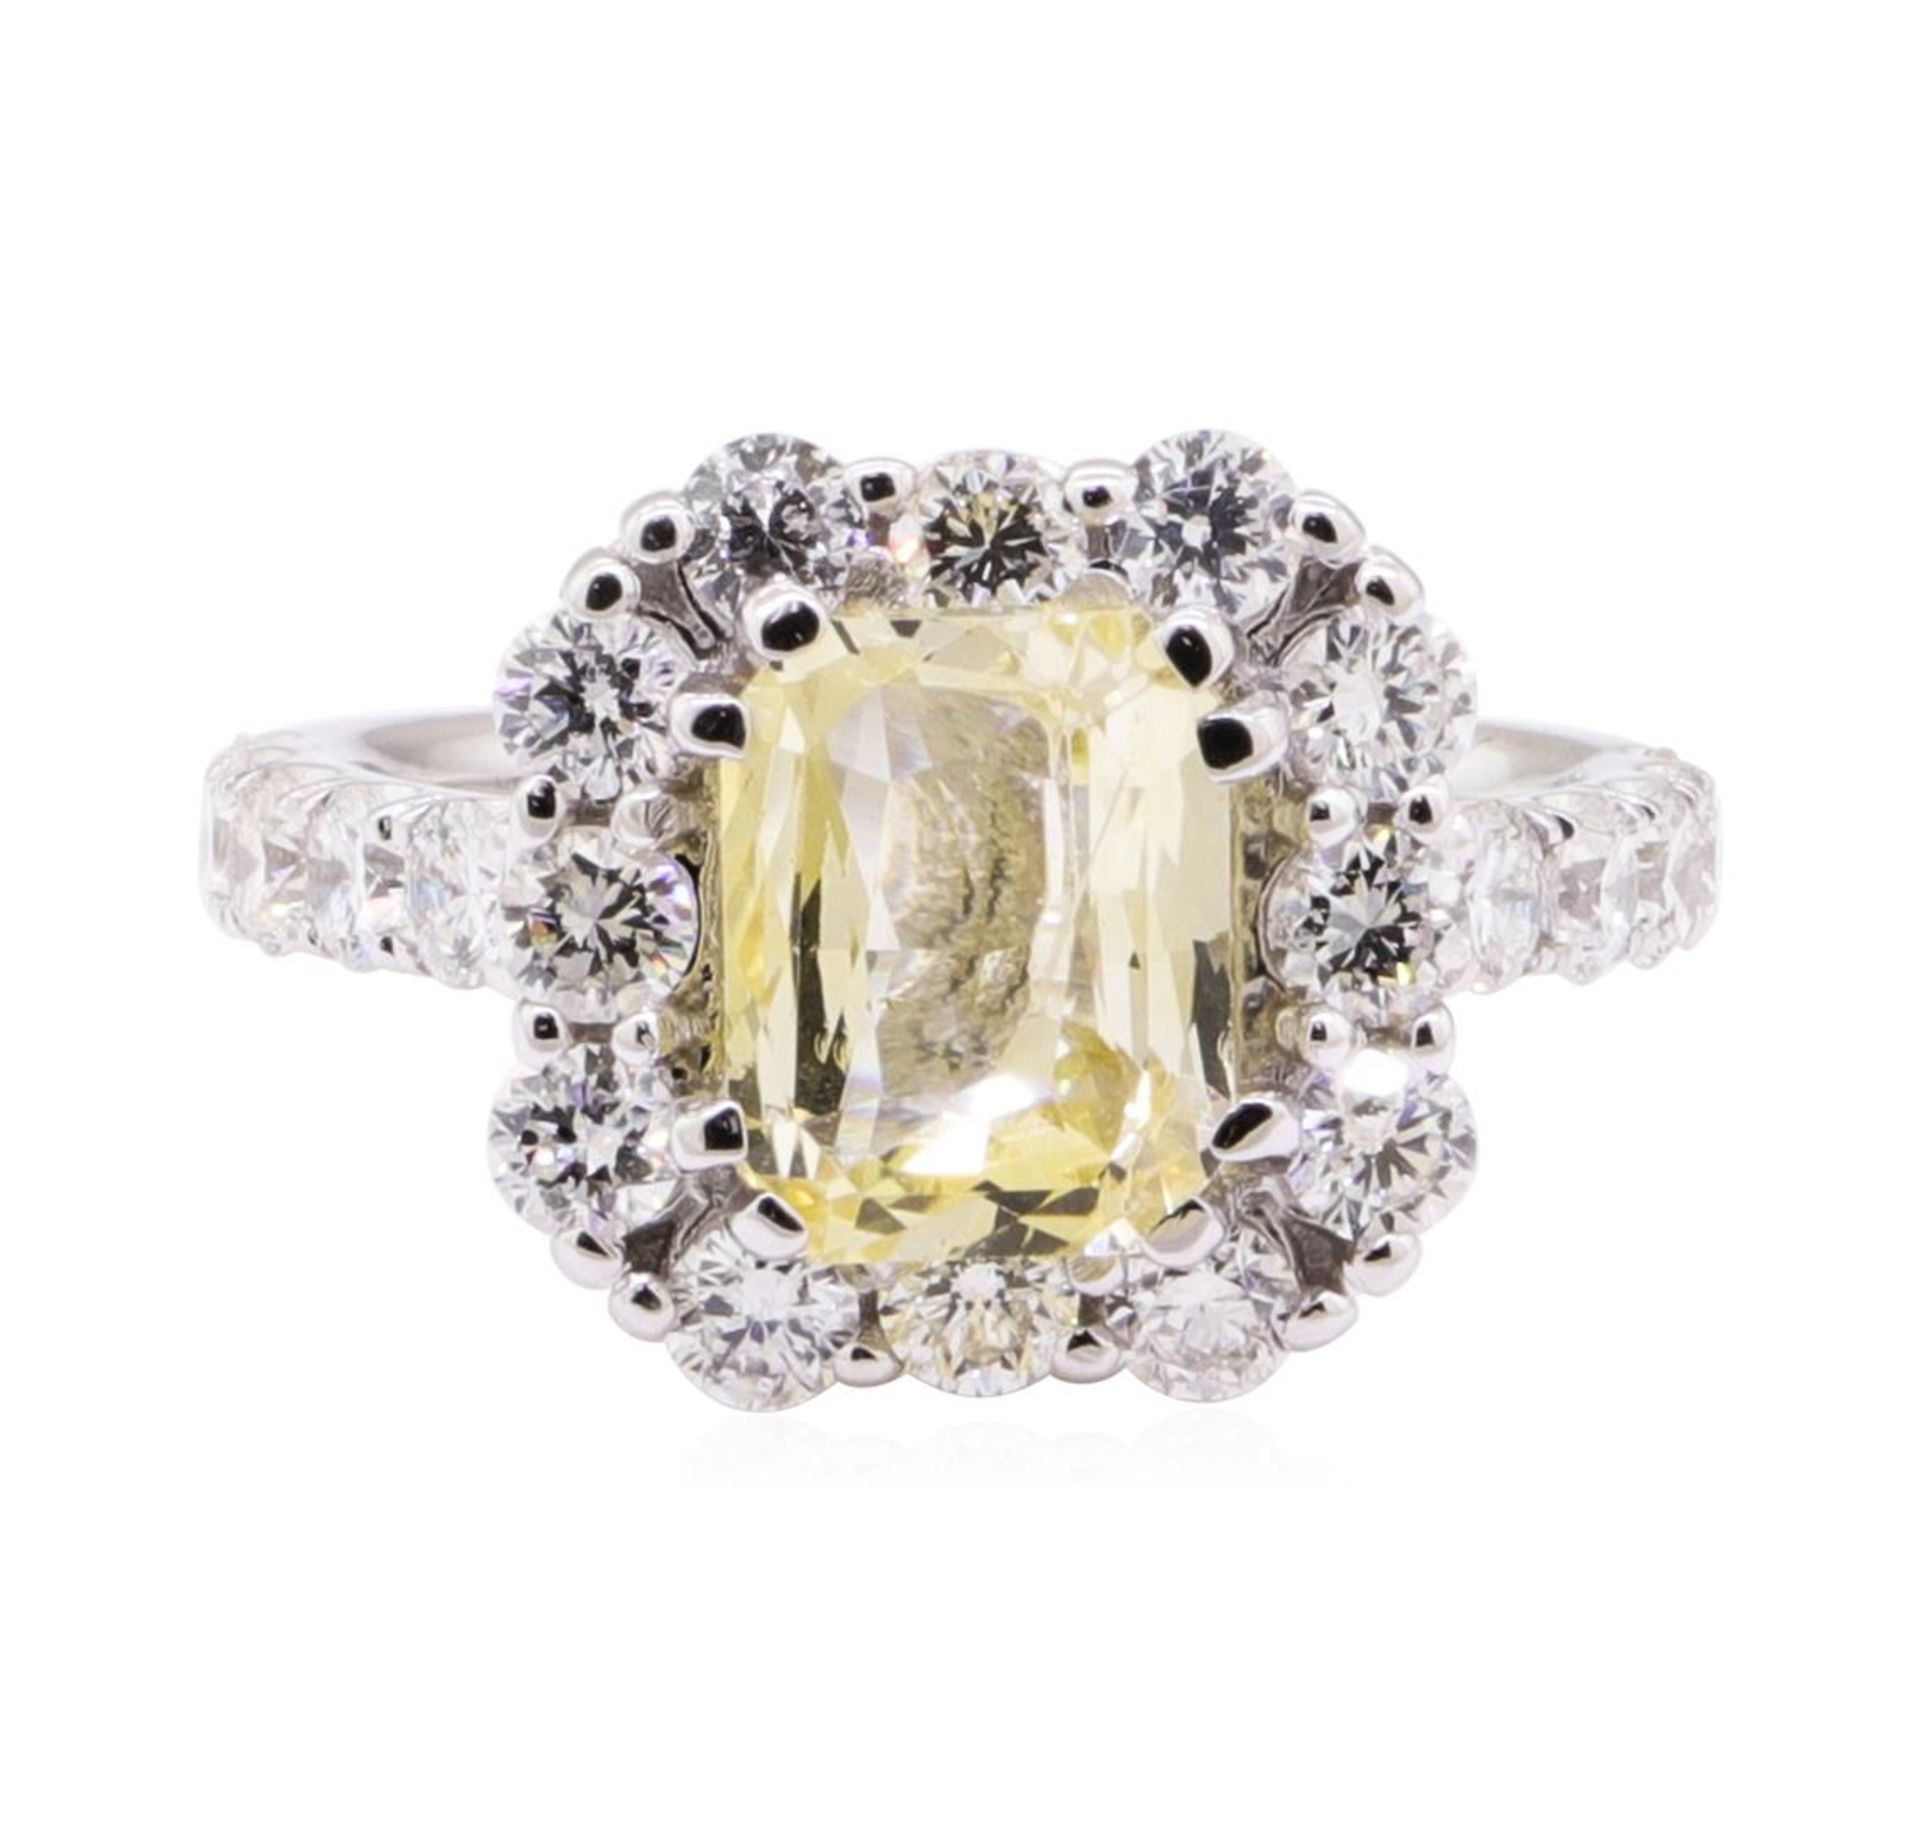 3.19 ctw Yellow Topaz And Diamond Ring - 18KT White Gold - Image 2 of 5